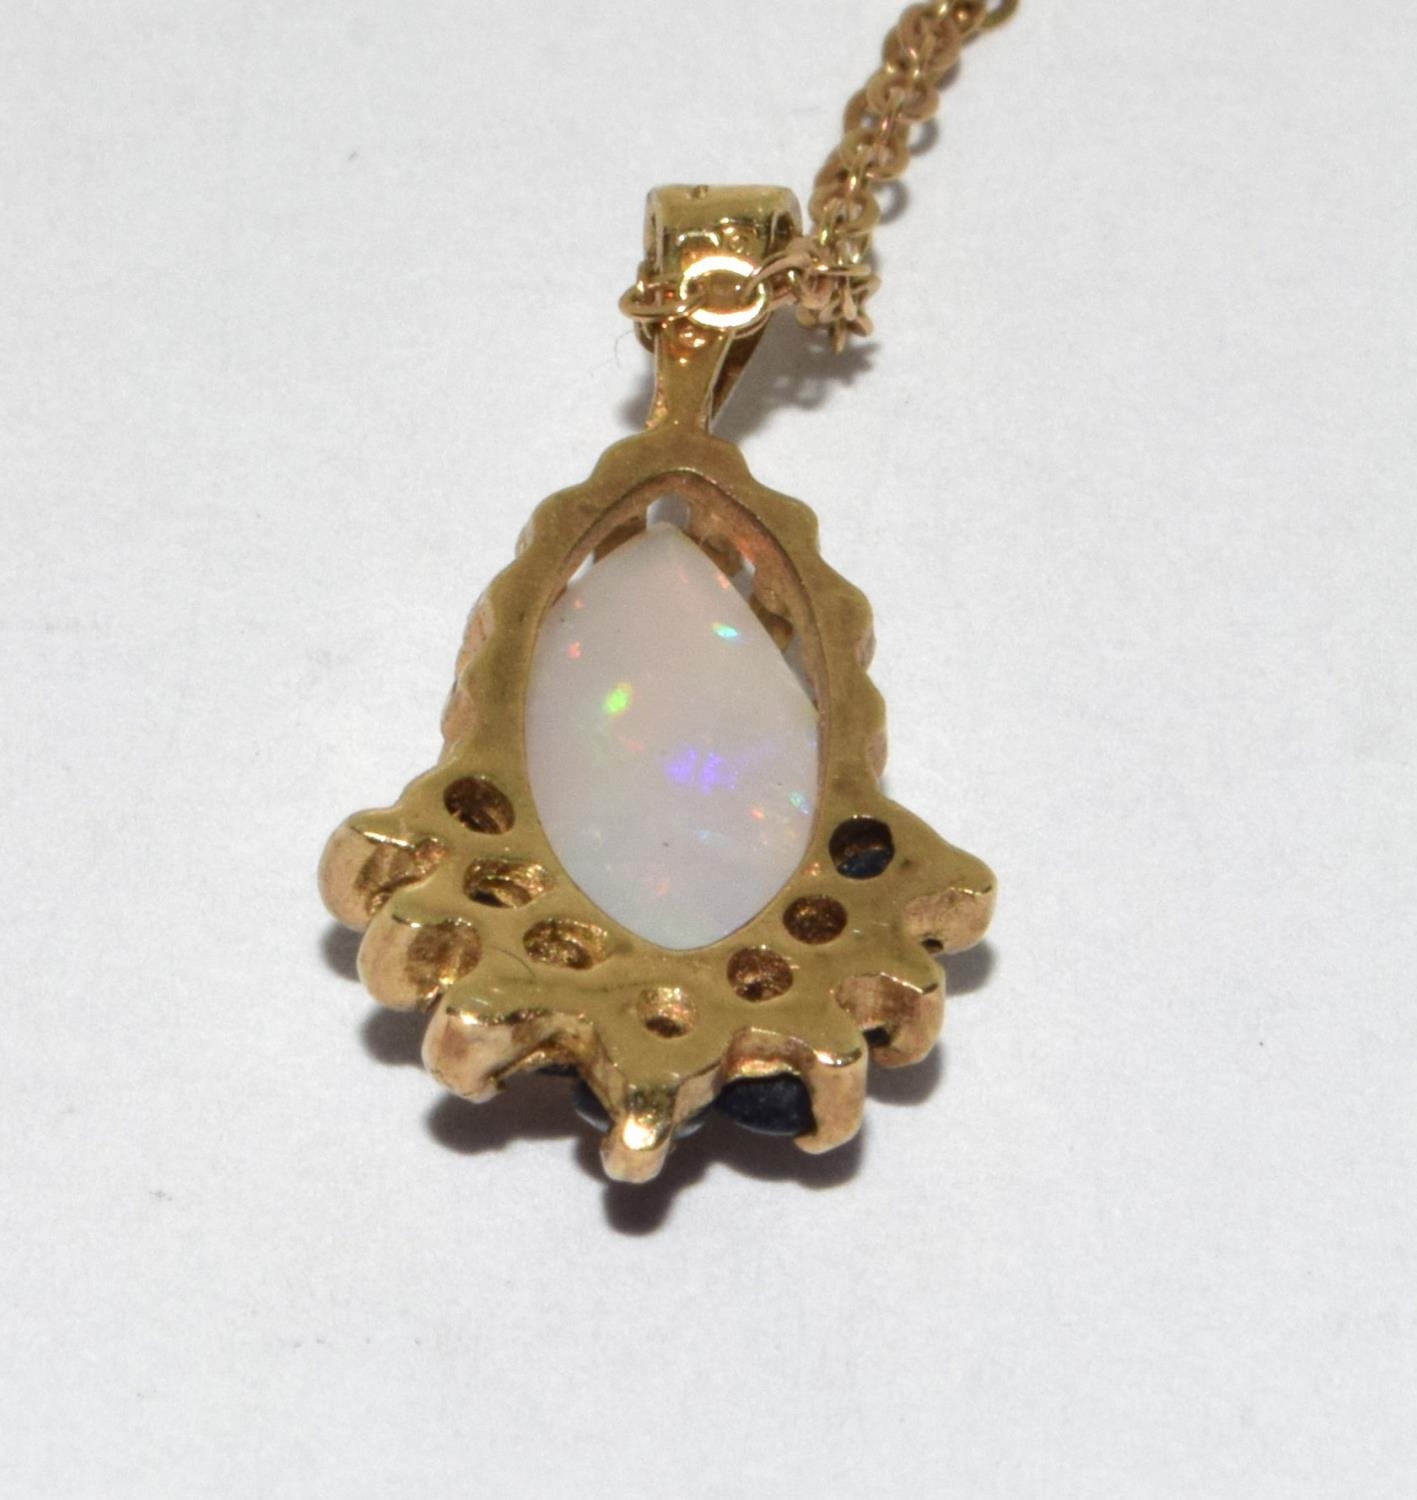 9ct gold ladies Opal and Sapphire pendant necklace with a chain 40cm - Image 5 of 6